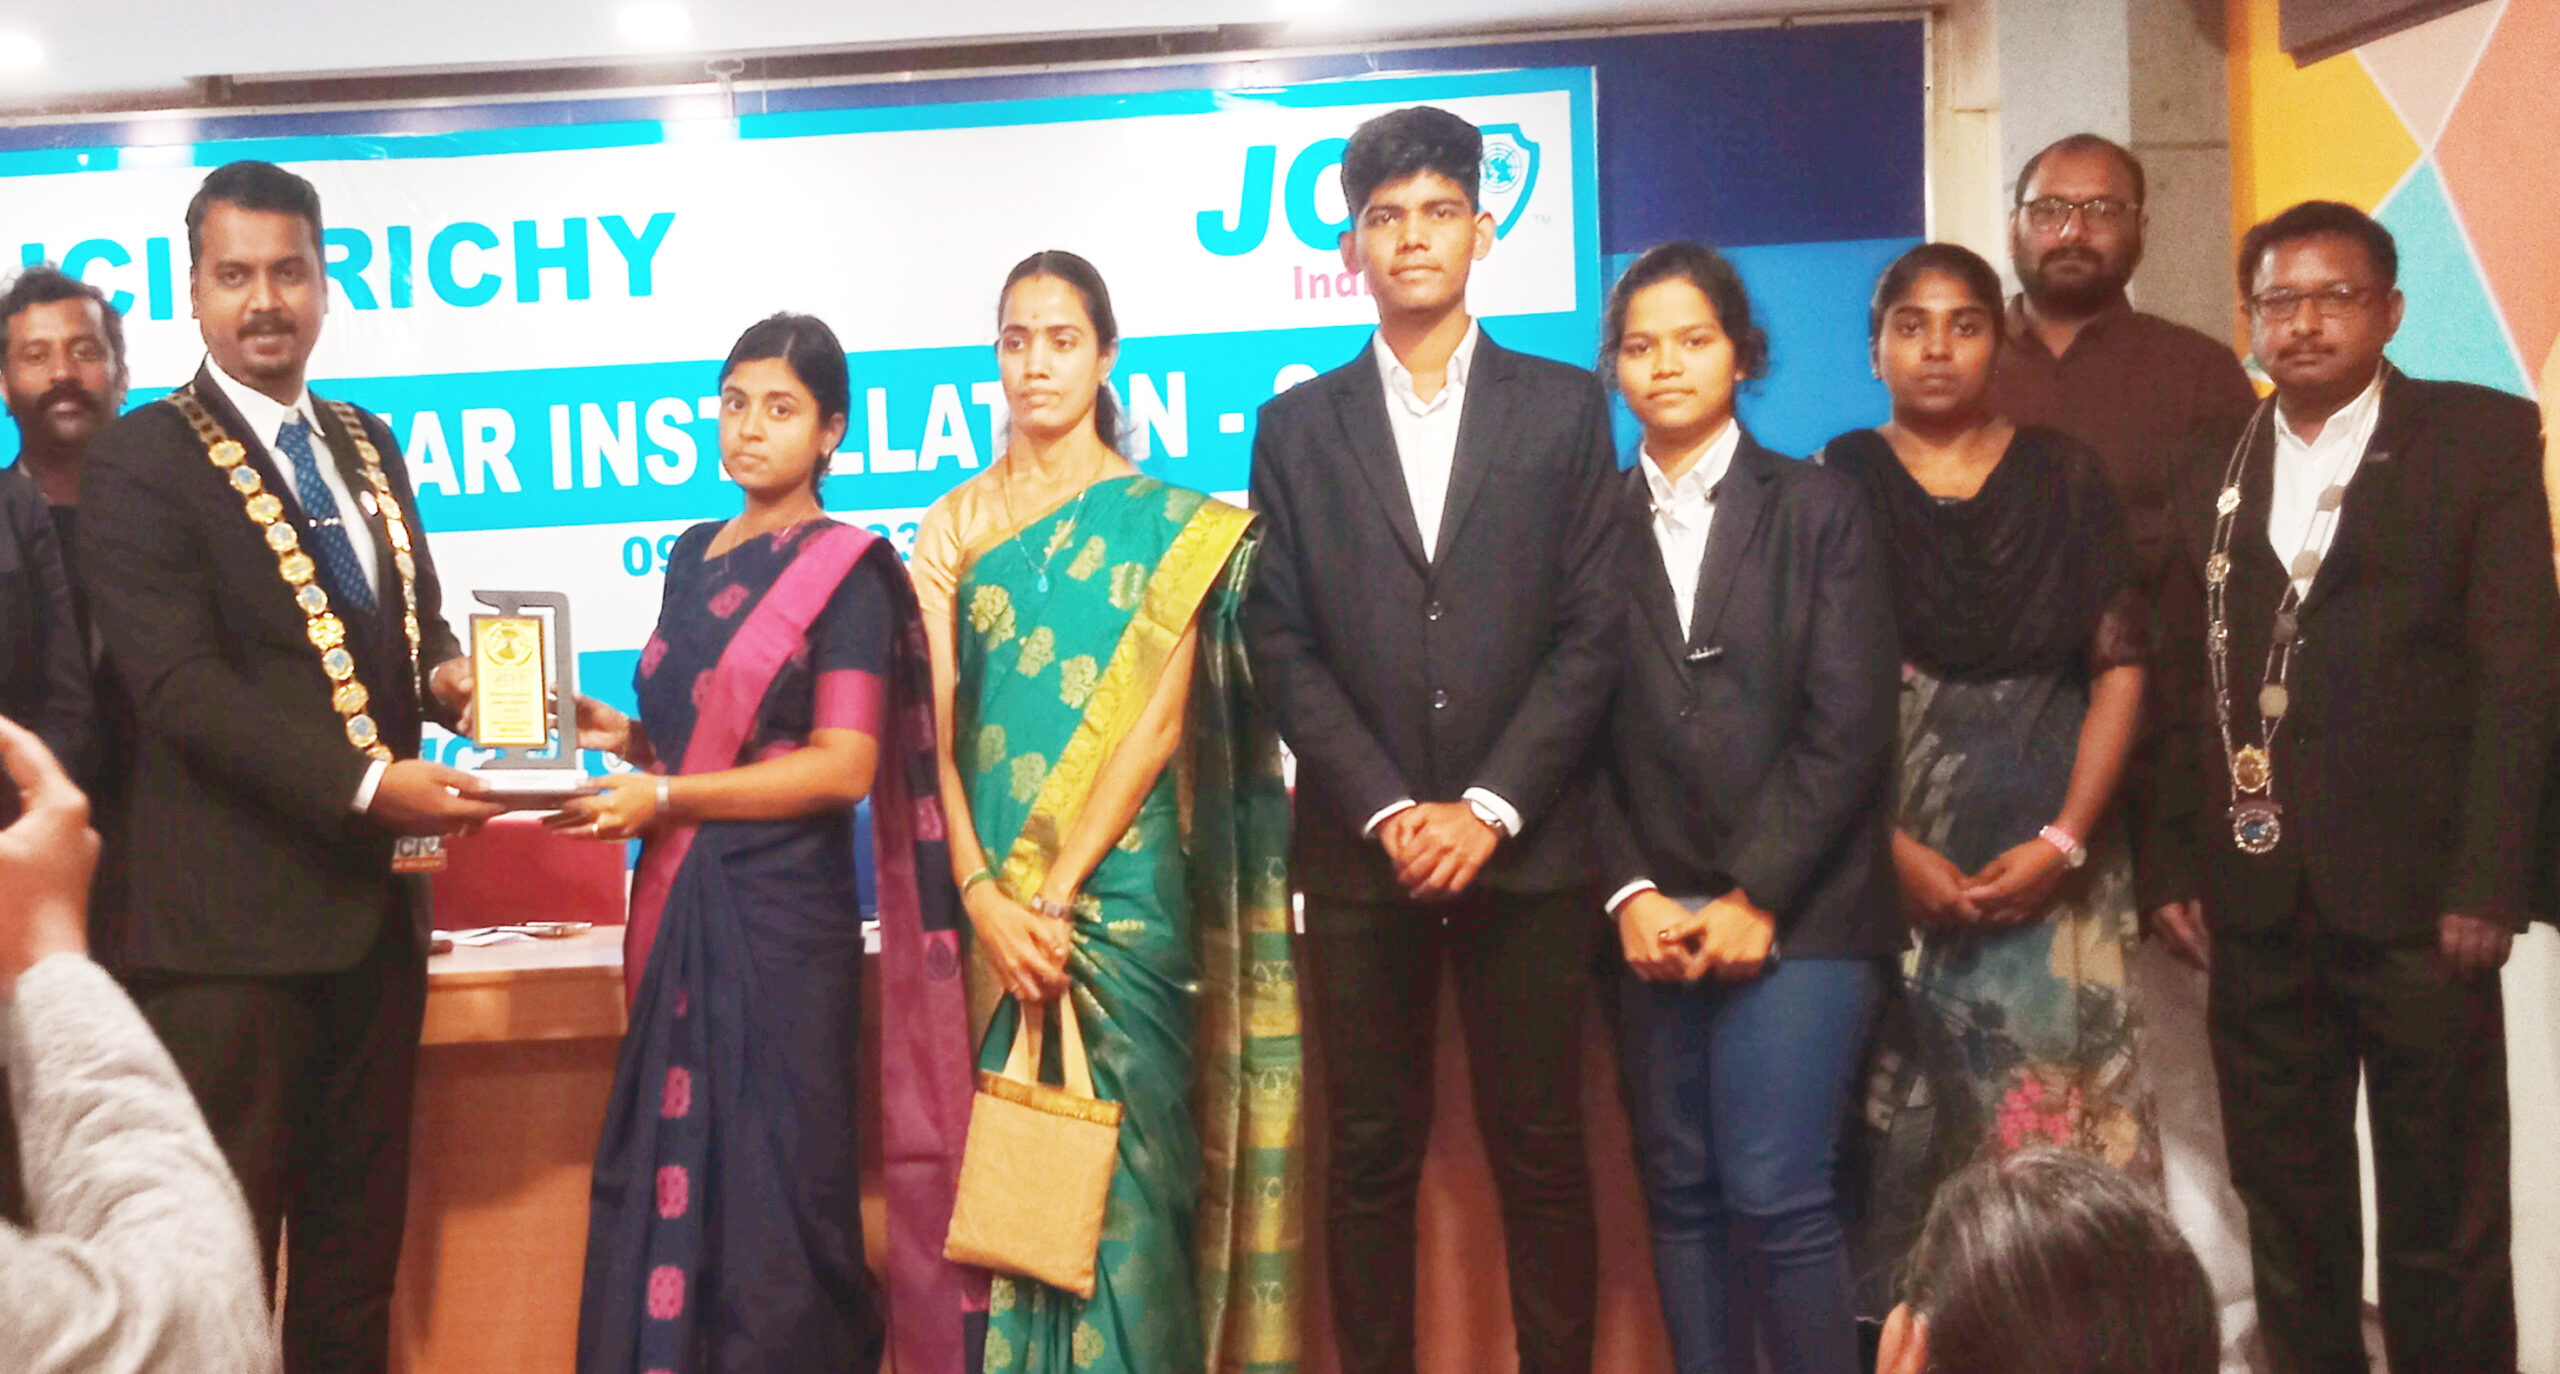 Ms. Iris Rinaldi.F Assistant Professor, M.A.M. B-SCHOOL received the prestigious beacon of life Award from Junior Jaycee Wing Club for the exemplary performance inspiring the student community through the teaching profession on 15.09.2022.